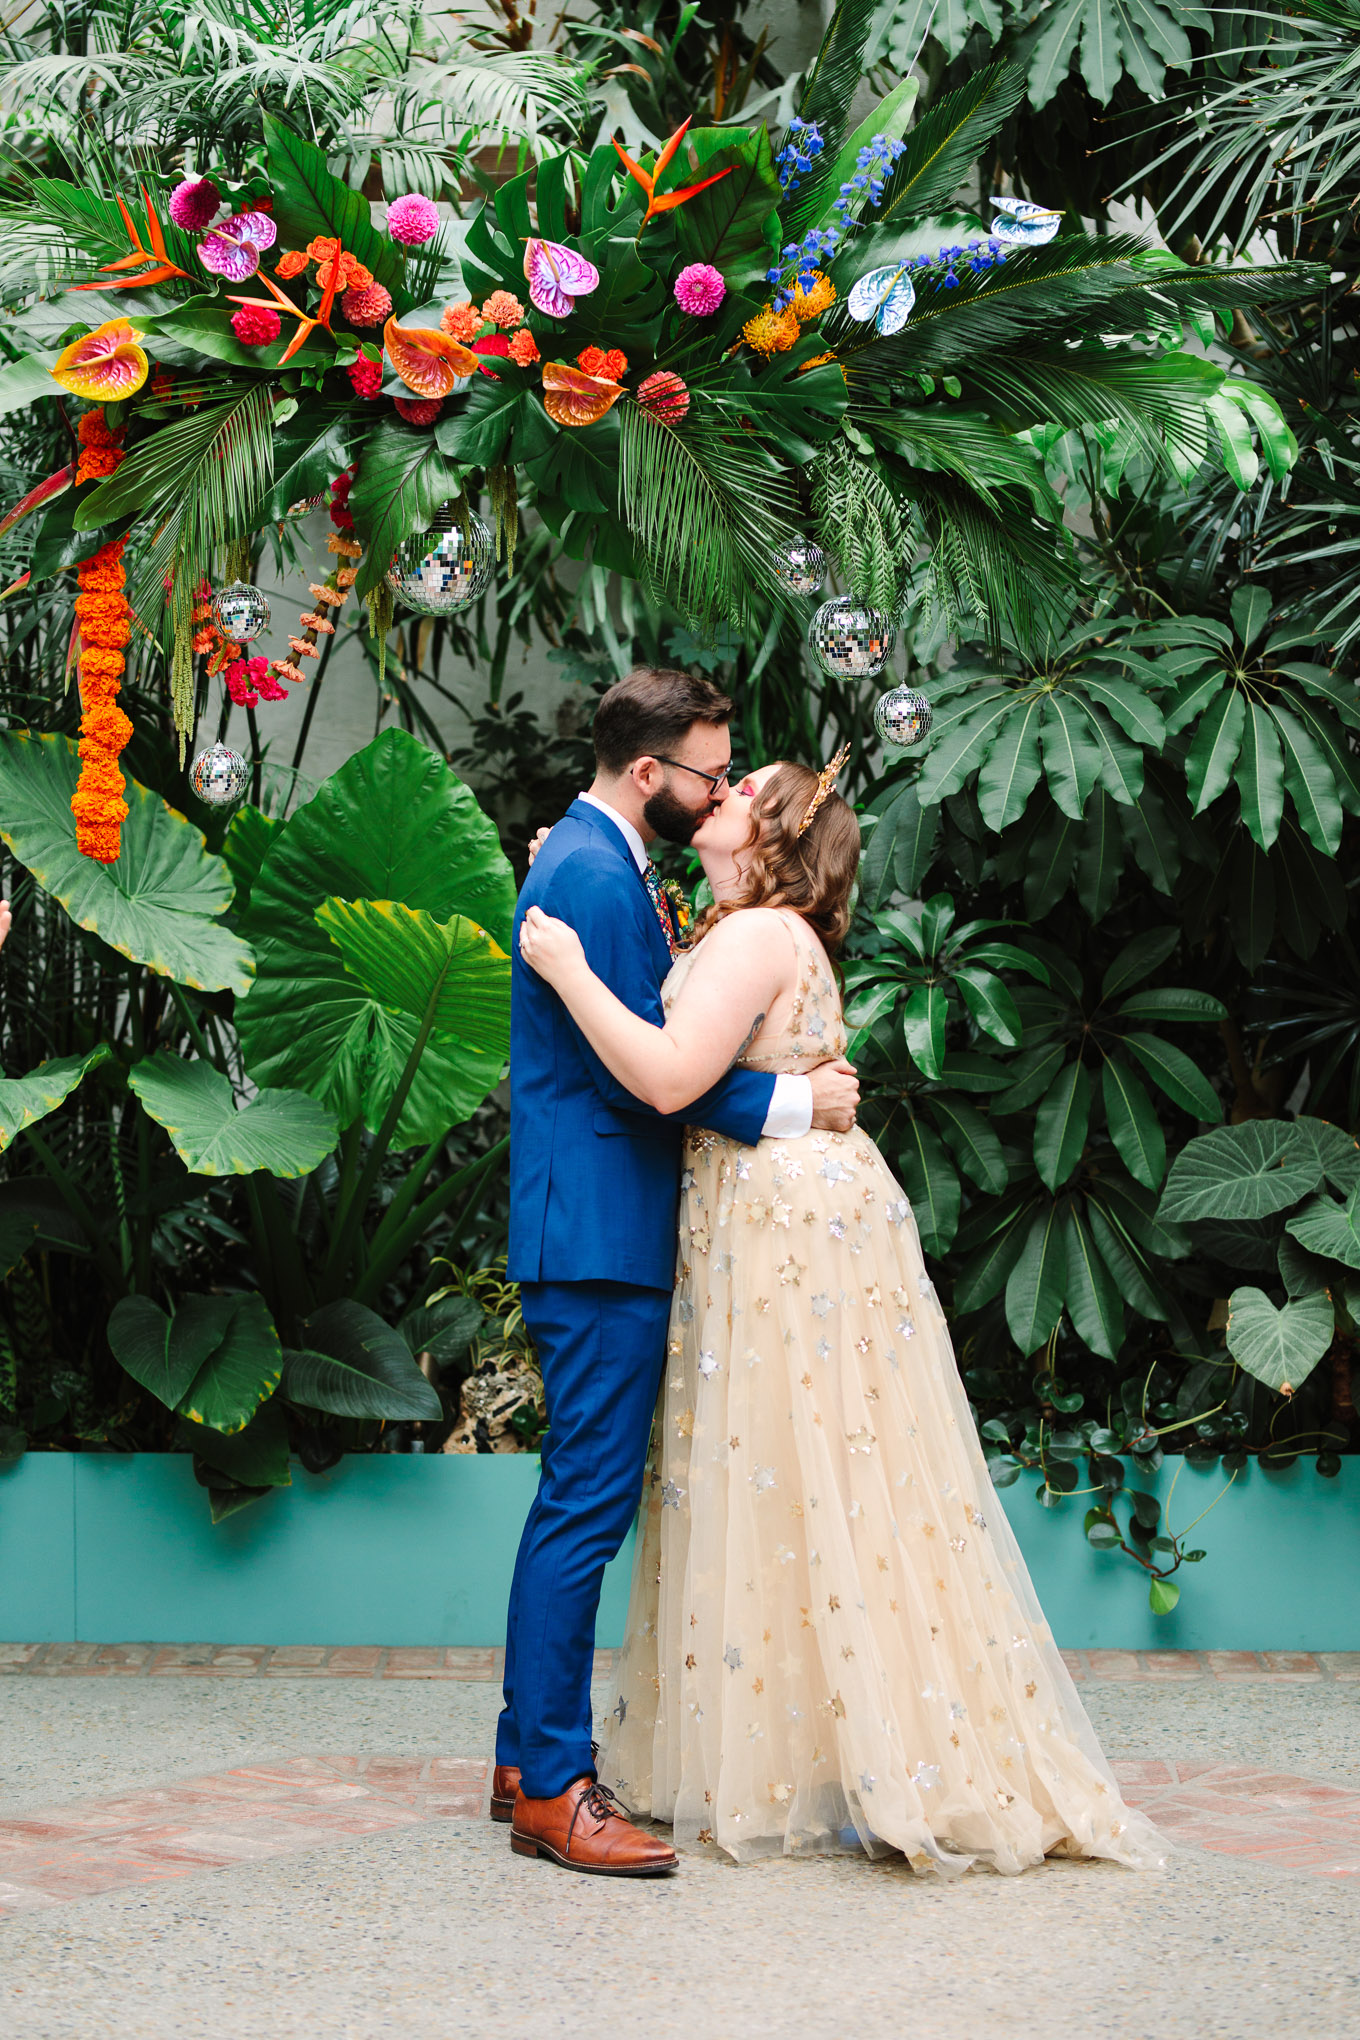 First kiss as husband and wife at wedding | Colorful Downtown Los Angeles Valentine Wedding | Los Angeles wedding photographer | #losangeleswedding #colorfulwedding #DTLA #valentinedtla   Source: Mary Costa Photography | Los Angeles